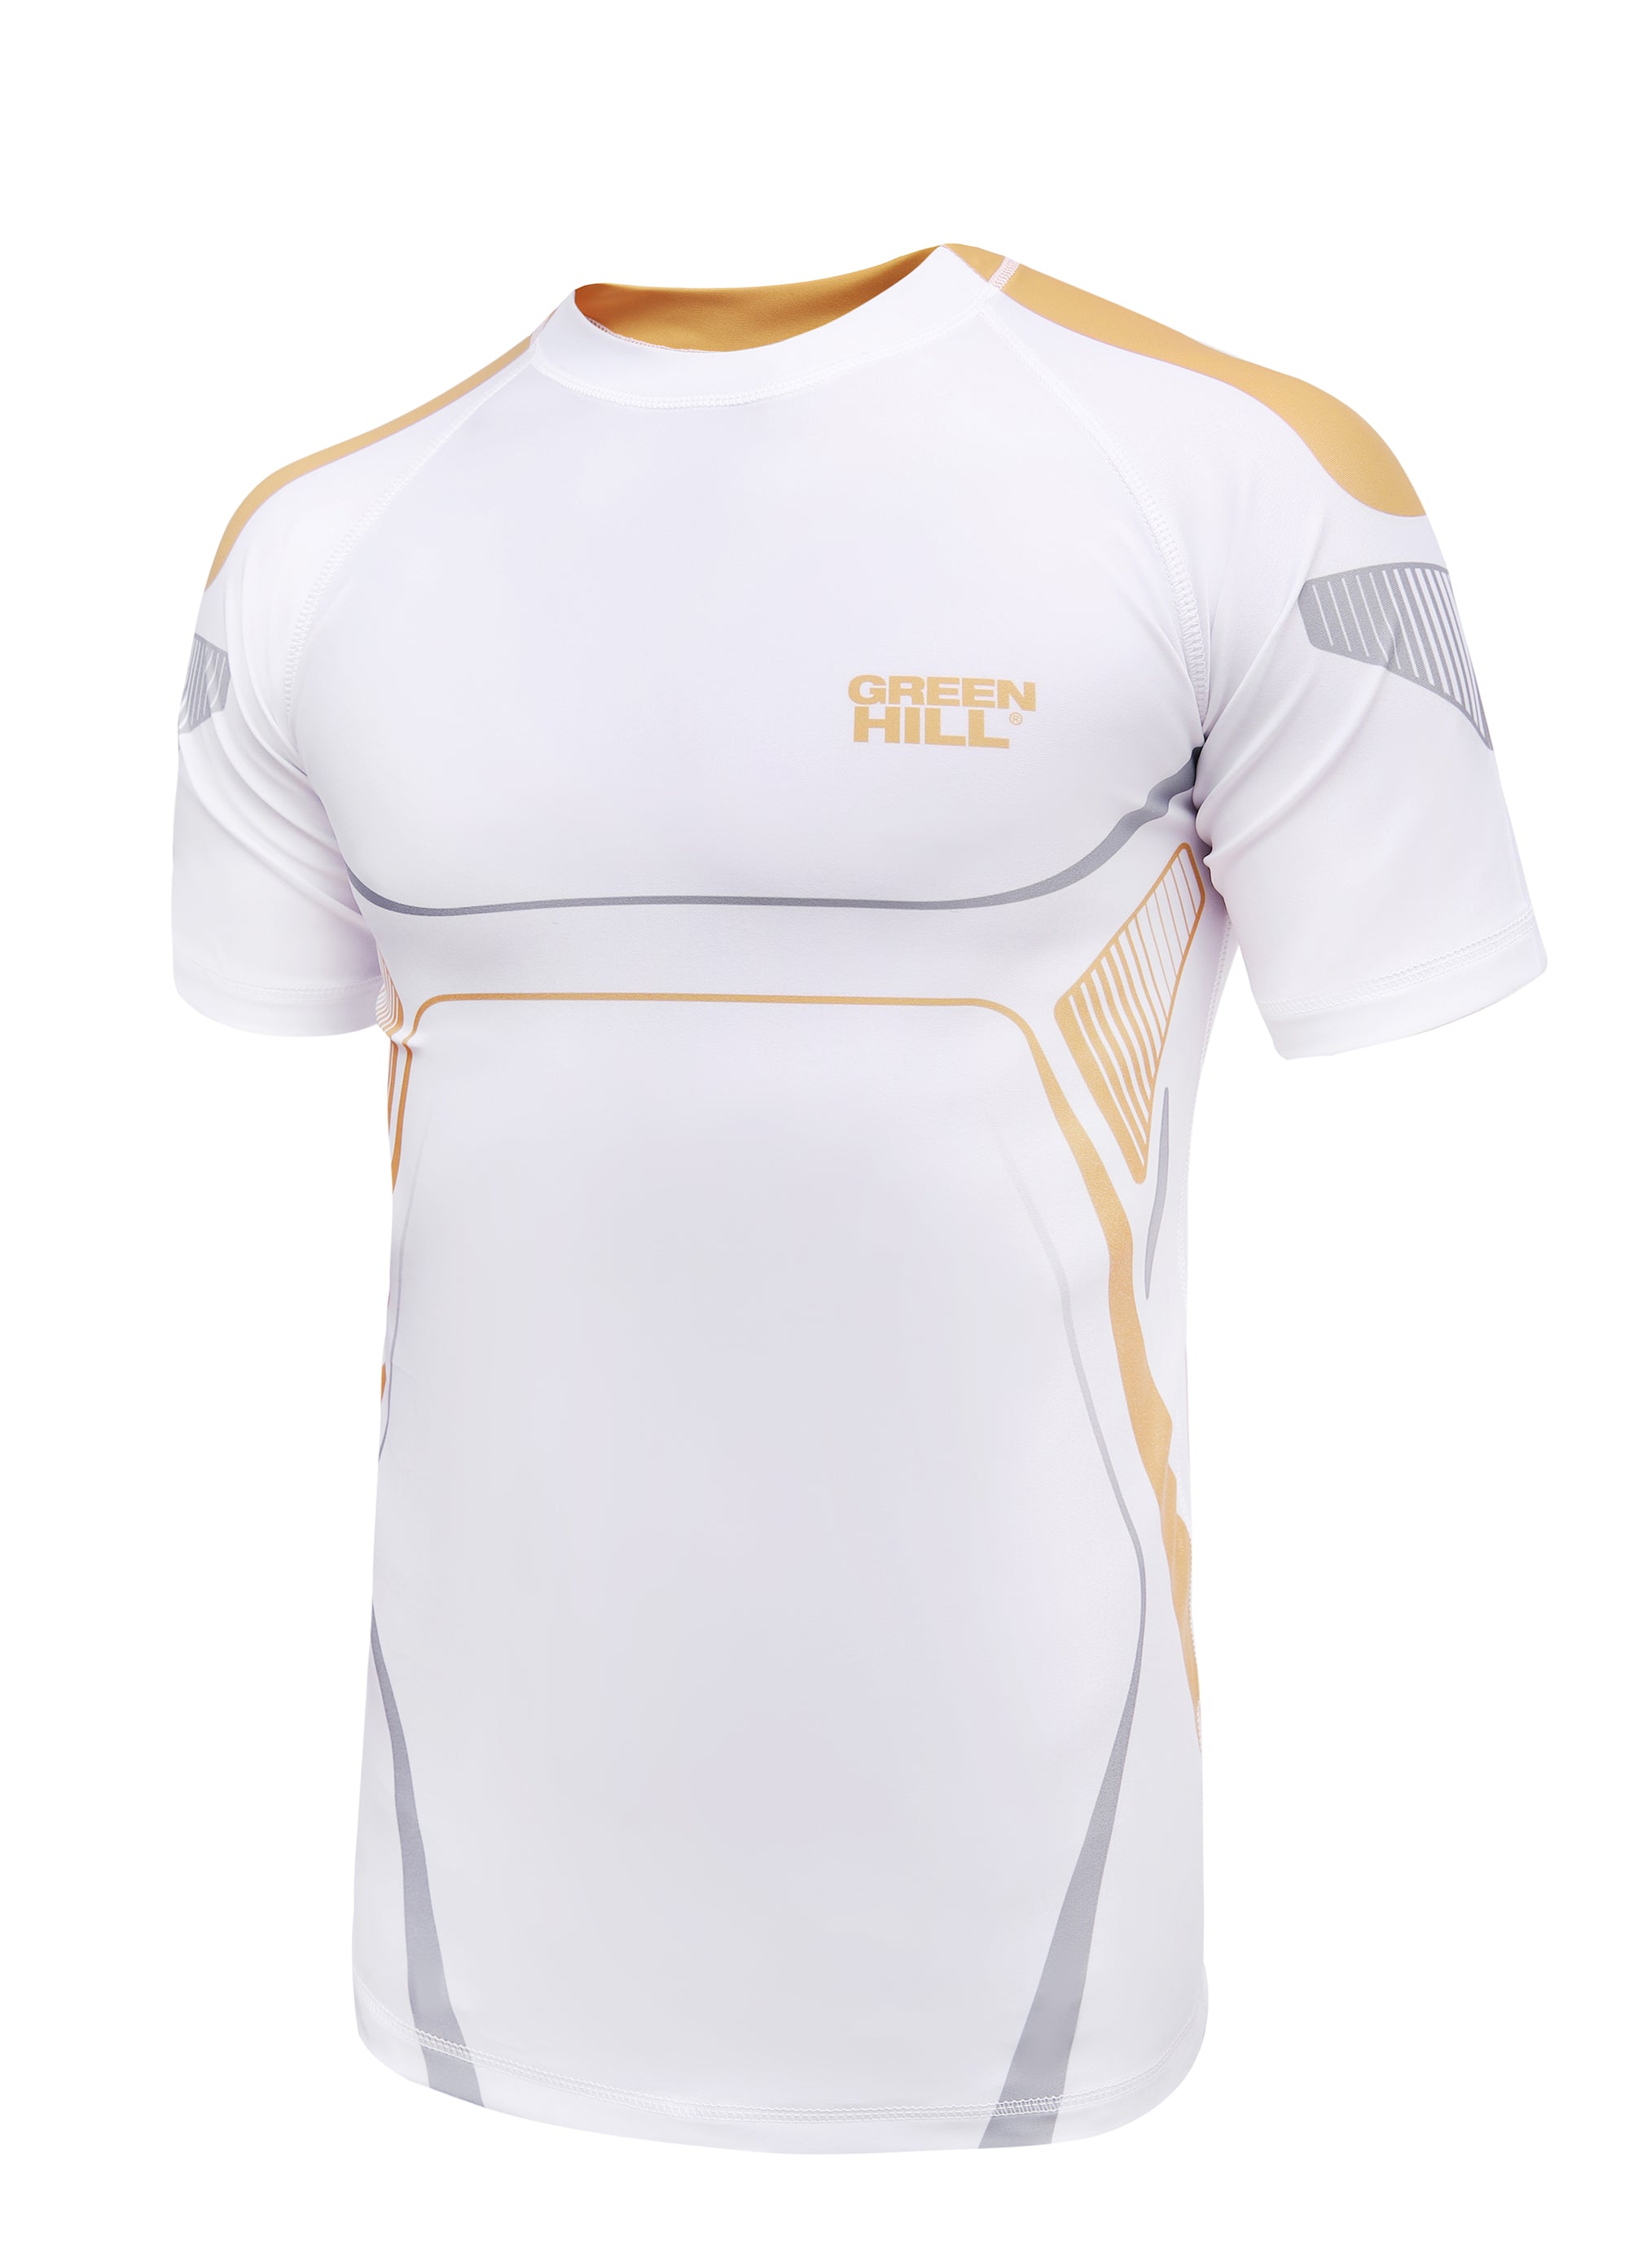 Green Hill IMMAF Approved Rash Guard White 2023